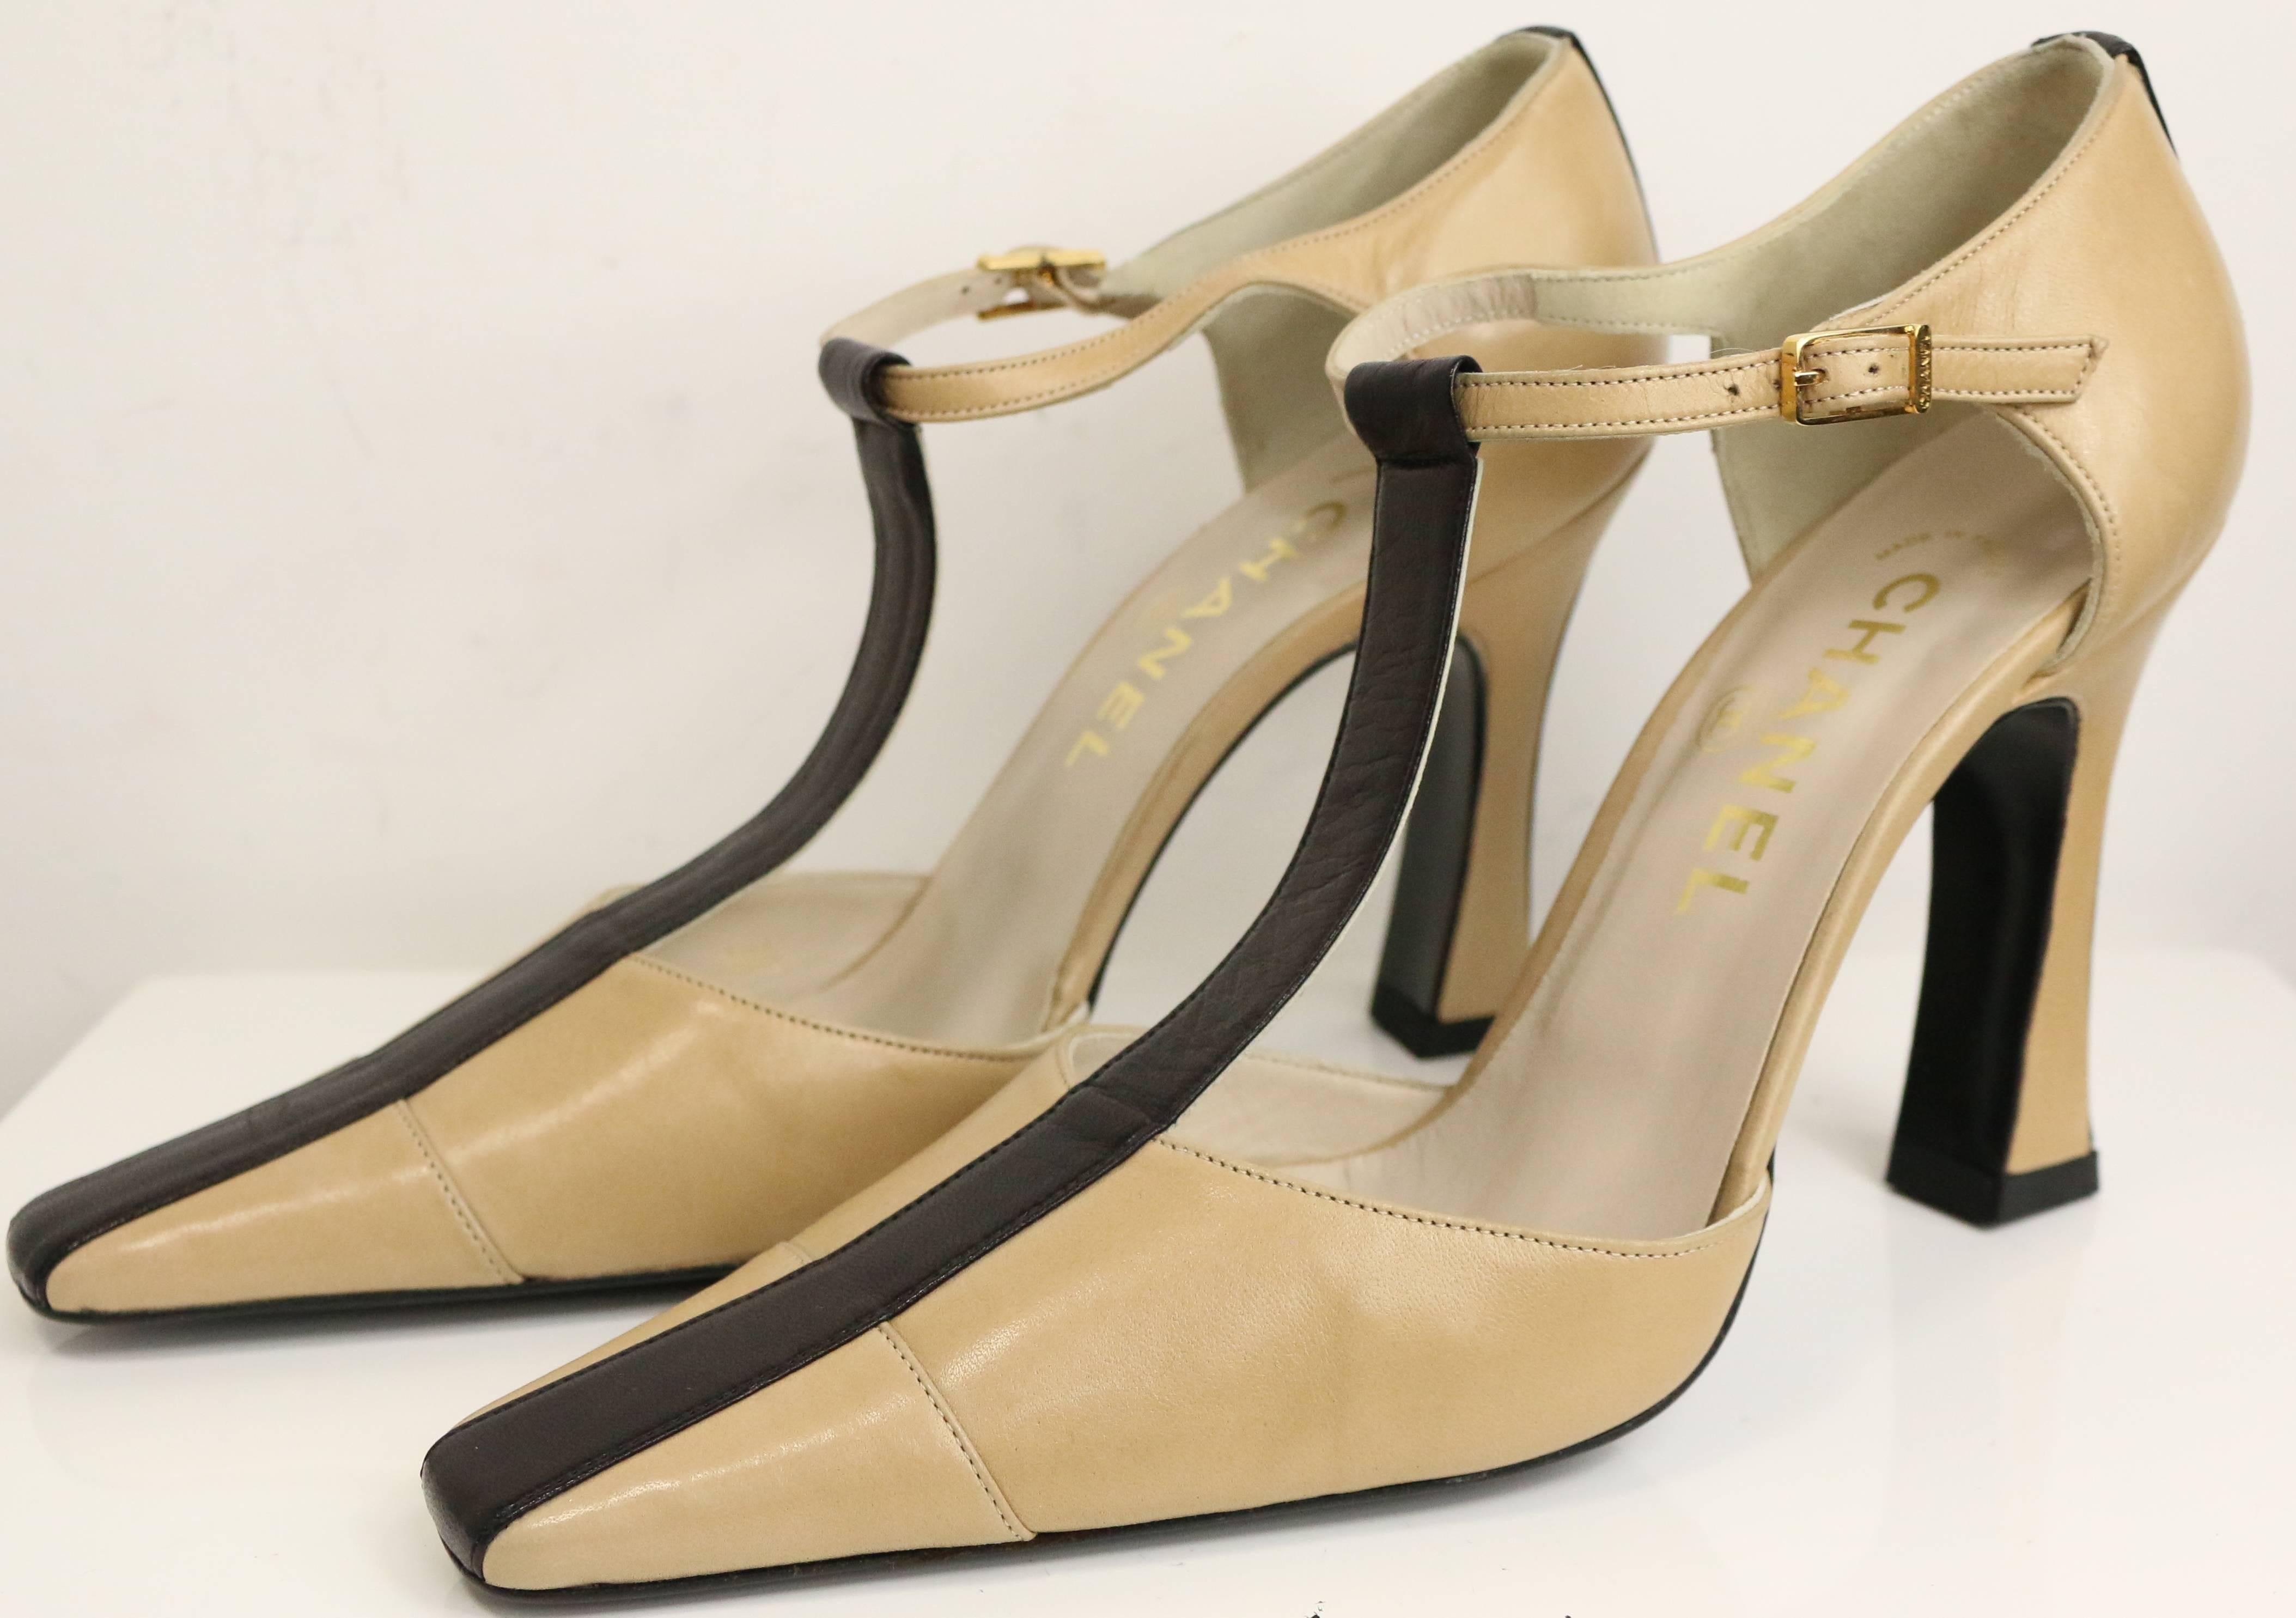 - Chanel bi tones beige/black strap heels. 

- Size 38.5. 

- Made in Italy. 

- Length: 9in I Heels: 4in (approximately measurement)


